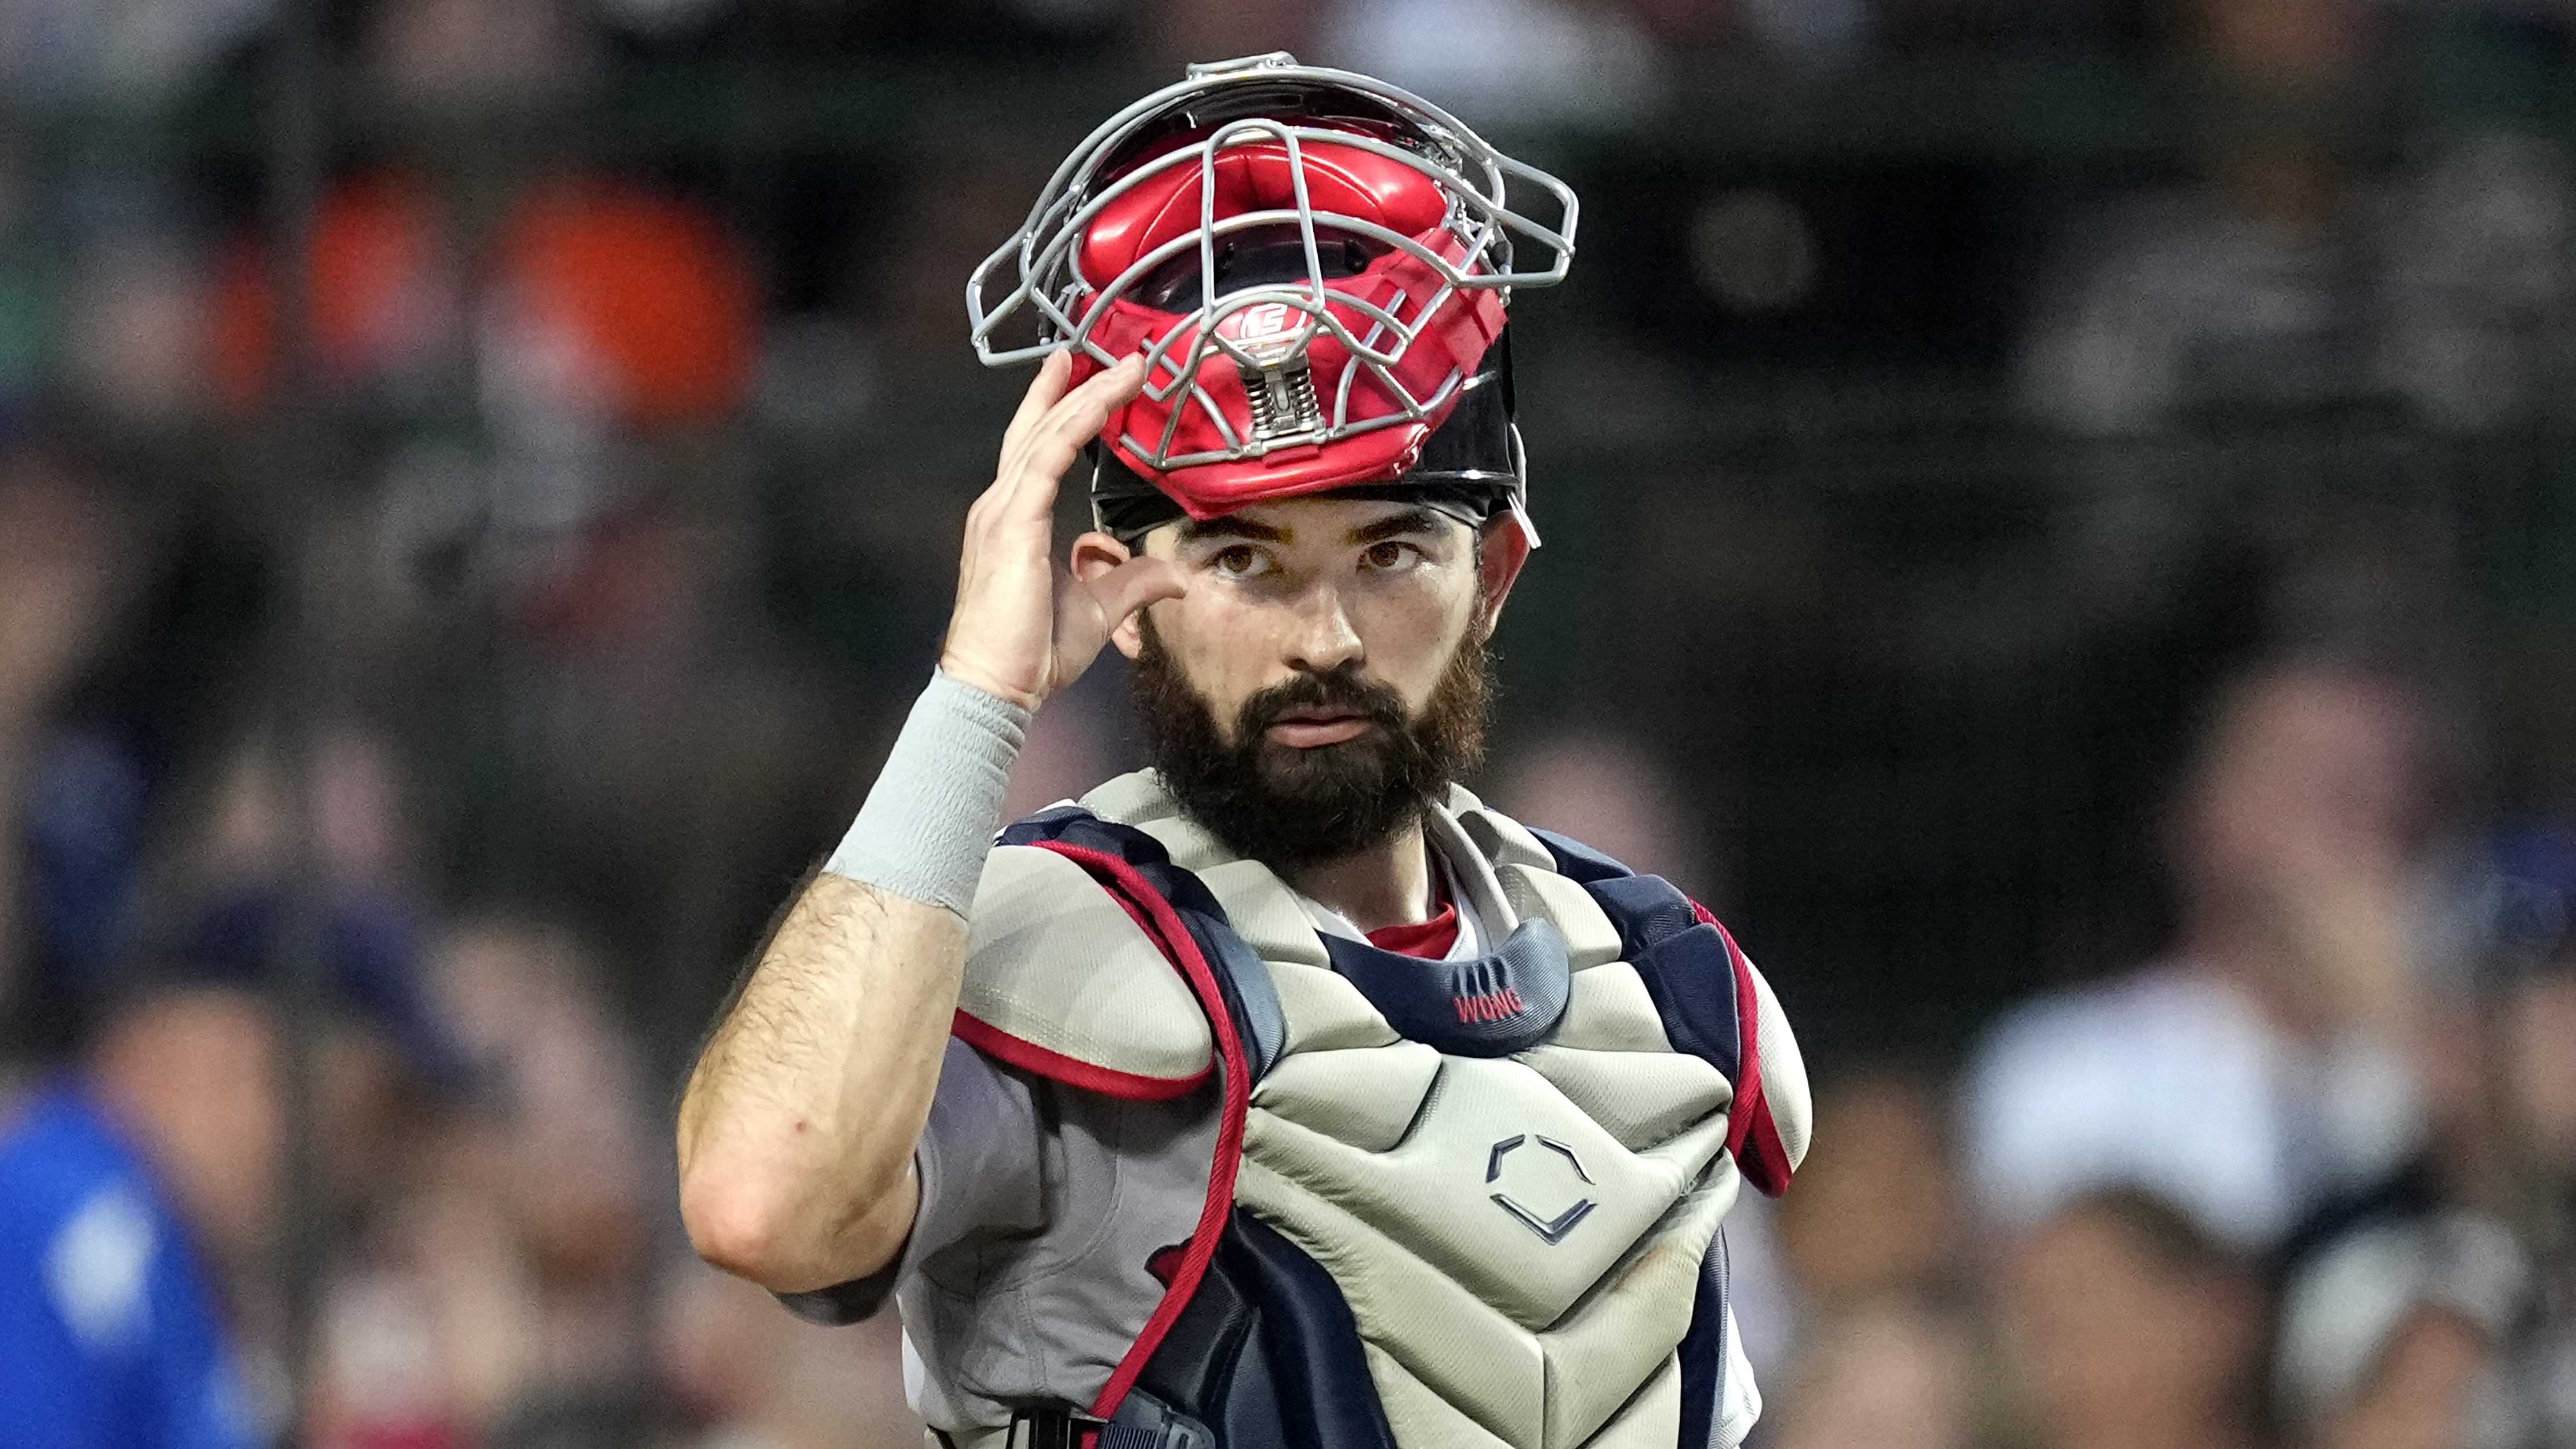 Red Sox catcher has a cannon arm and the advanced stats prove it